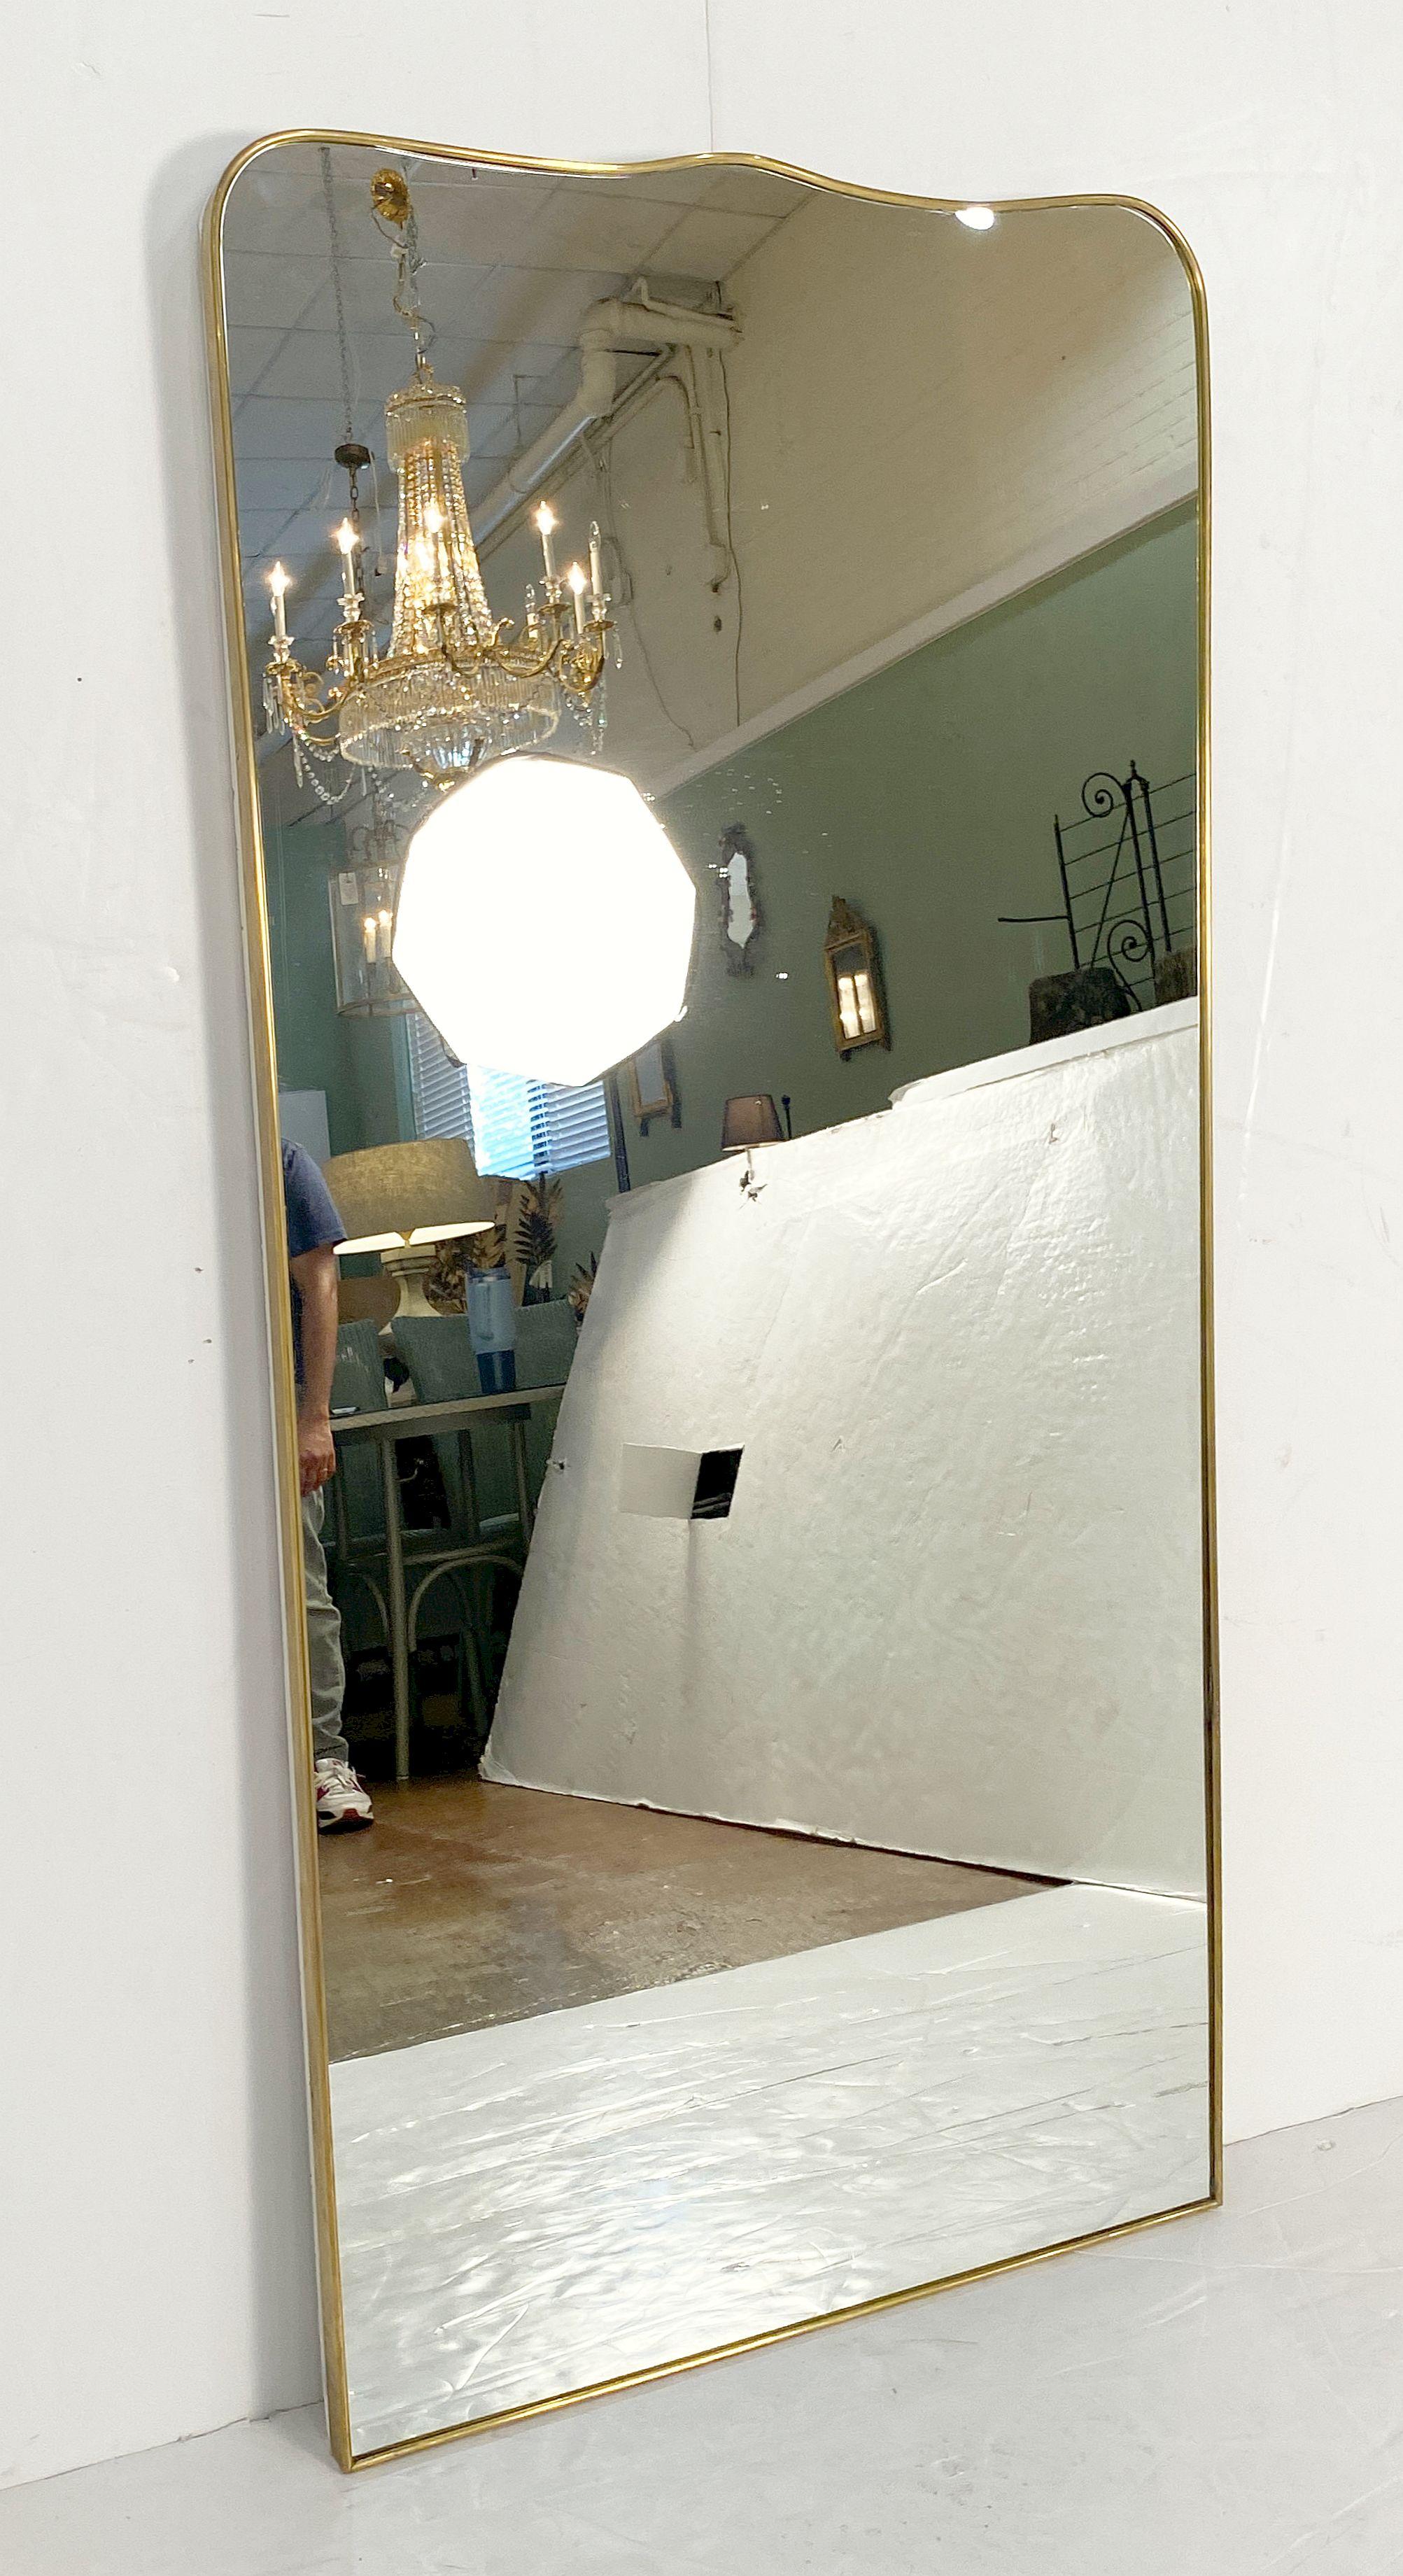 A fine large Italian Modern full-length wall or dressing mirror featuring a clean, Mid-Century design with an elegant, curved frame in brass, in the style of the famed designer, Gio Ponti. (Italian, 1891-1979)

An architect, furniture and industrial